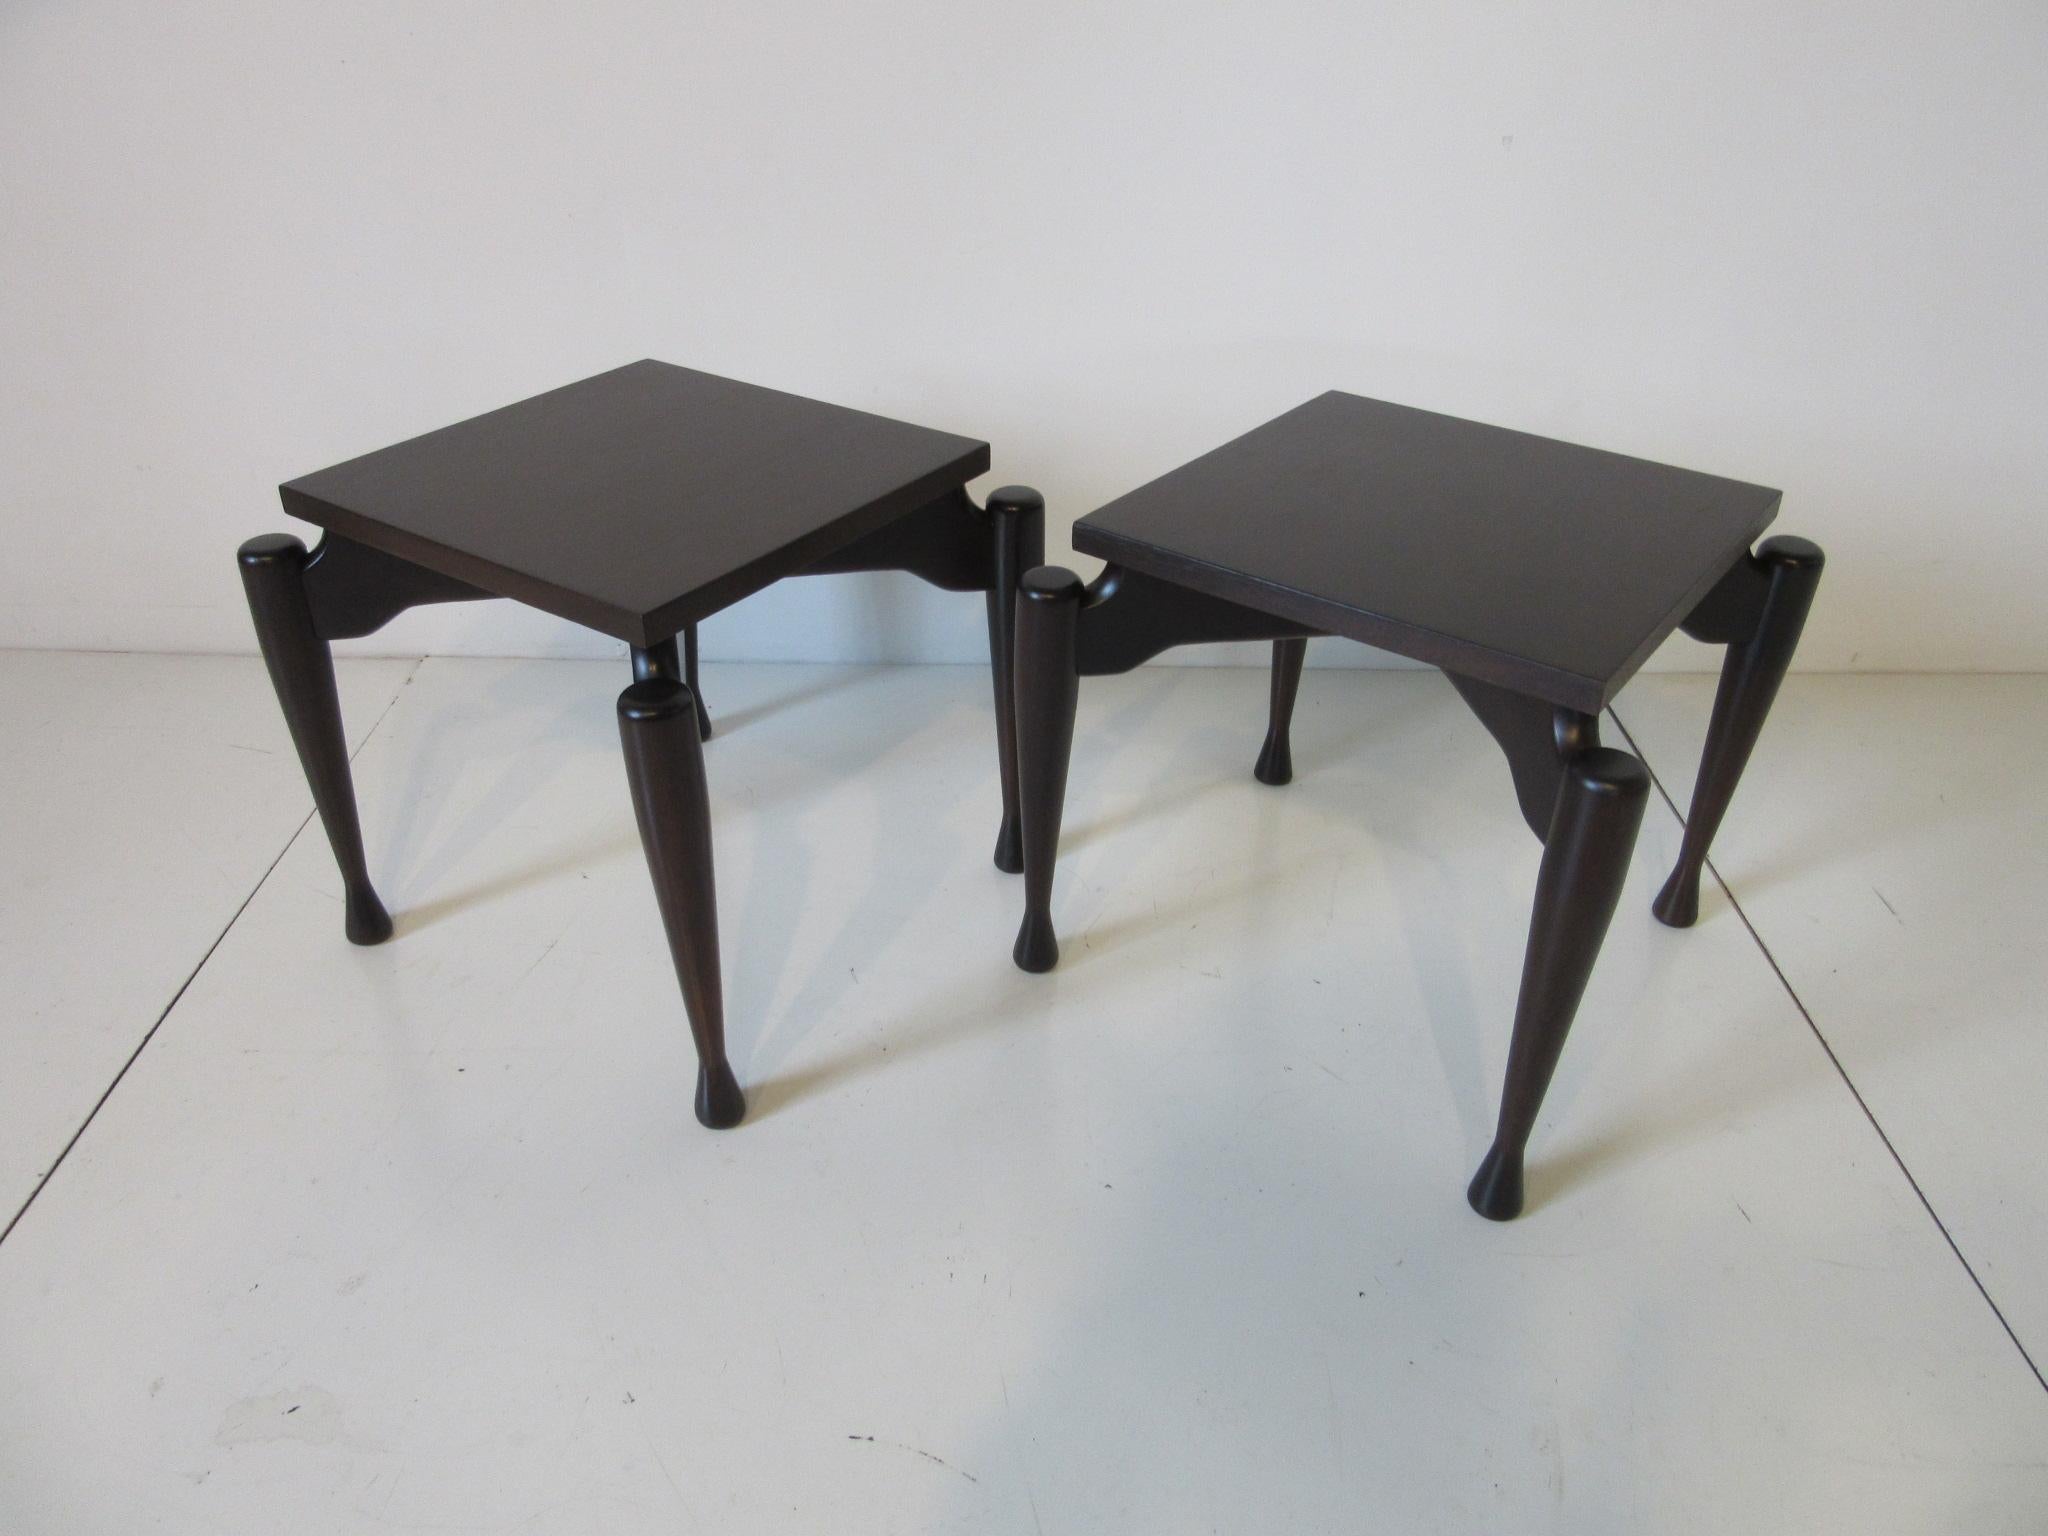 A pair of side or end tables with sculptural legs in a medium ebony finish with dark walnut tops in the Danish style.